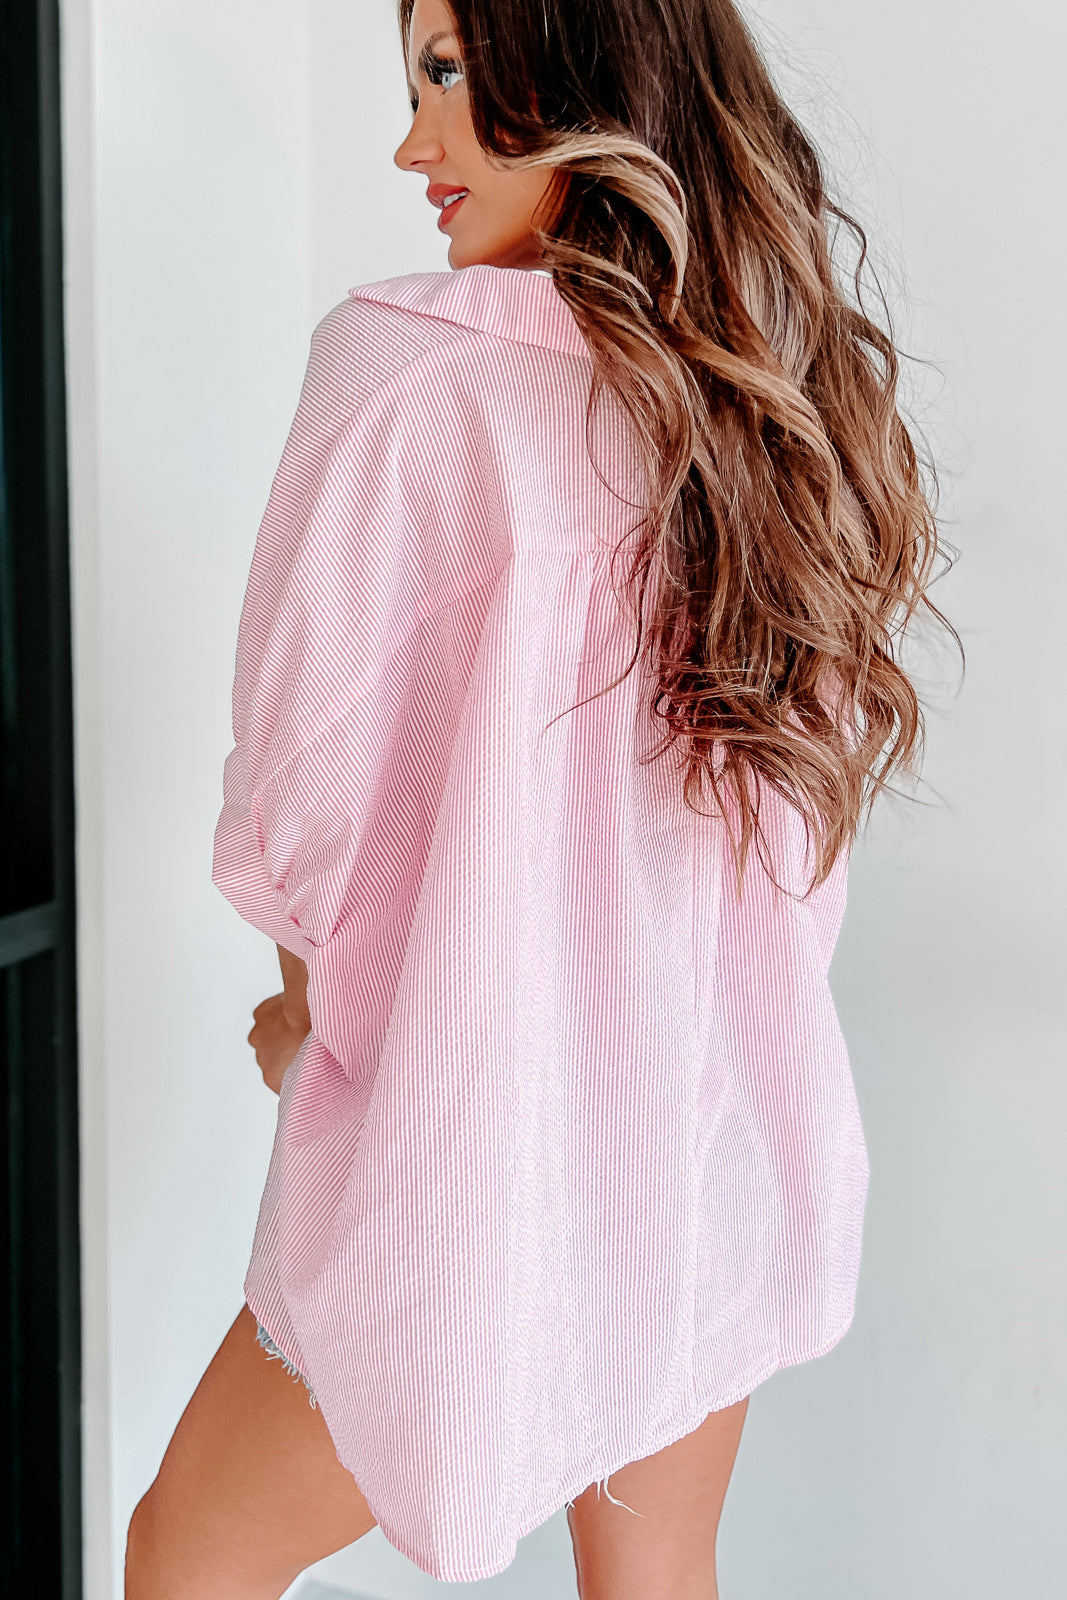 Staying Cute Oversized Striped Button-Down Top (Pink) - NanaMacs